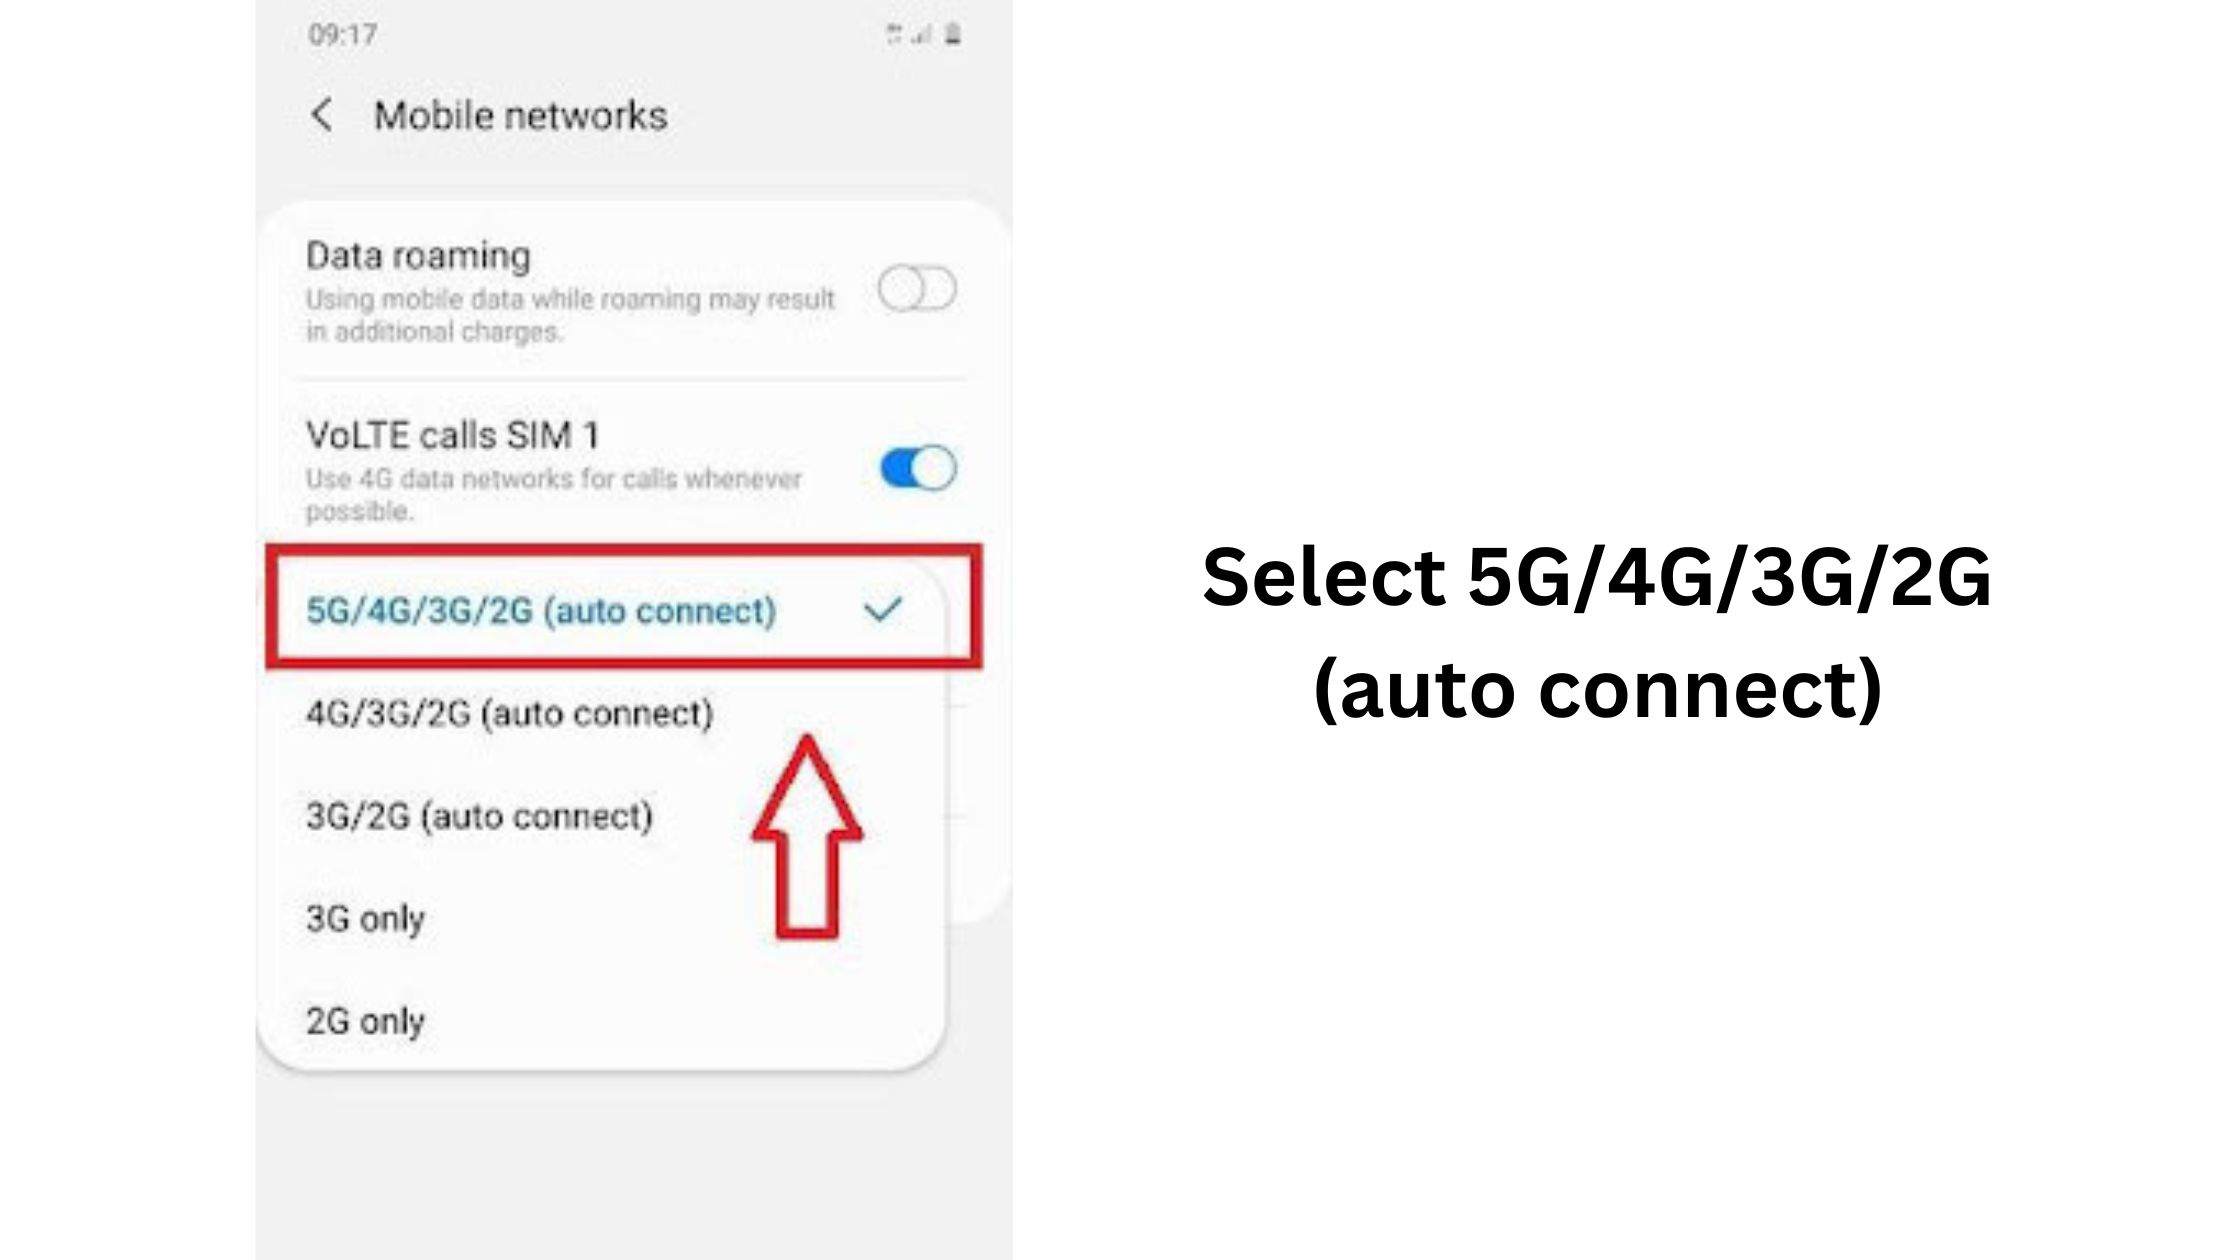 finally select 5G network for activate Jio 5G network on android